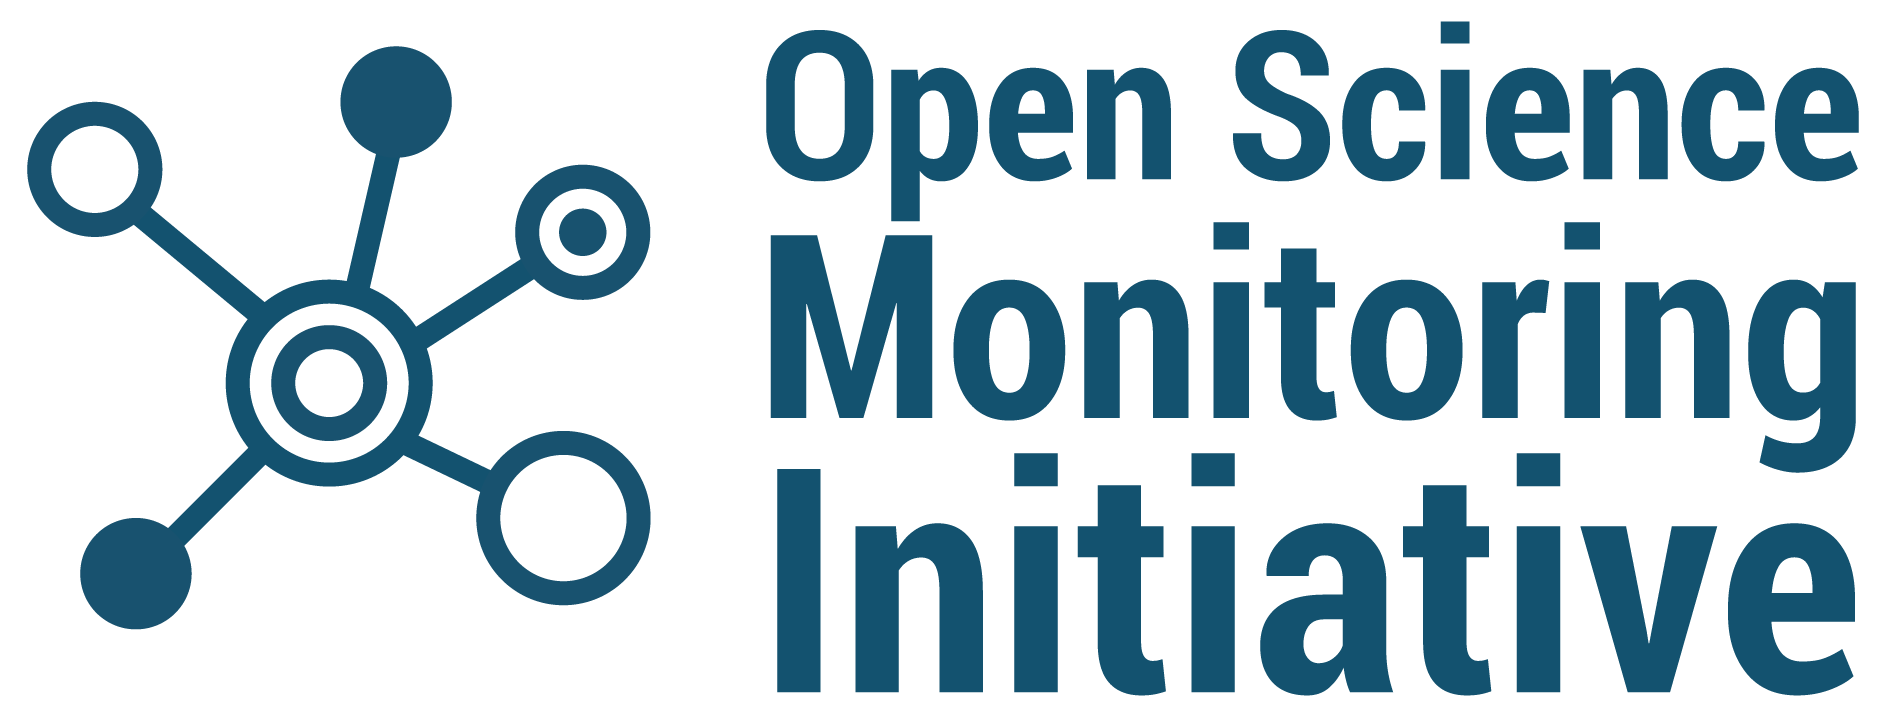 Open science monitoring